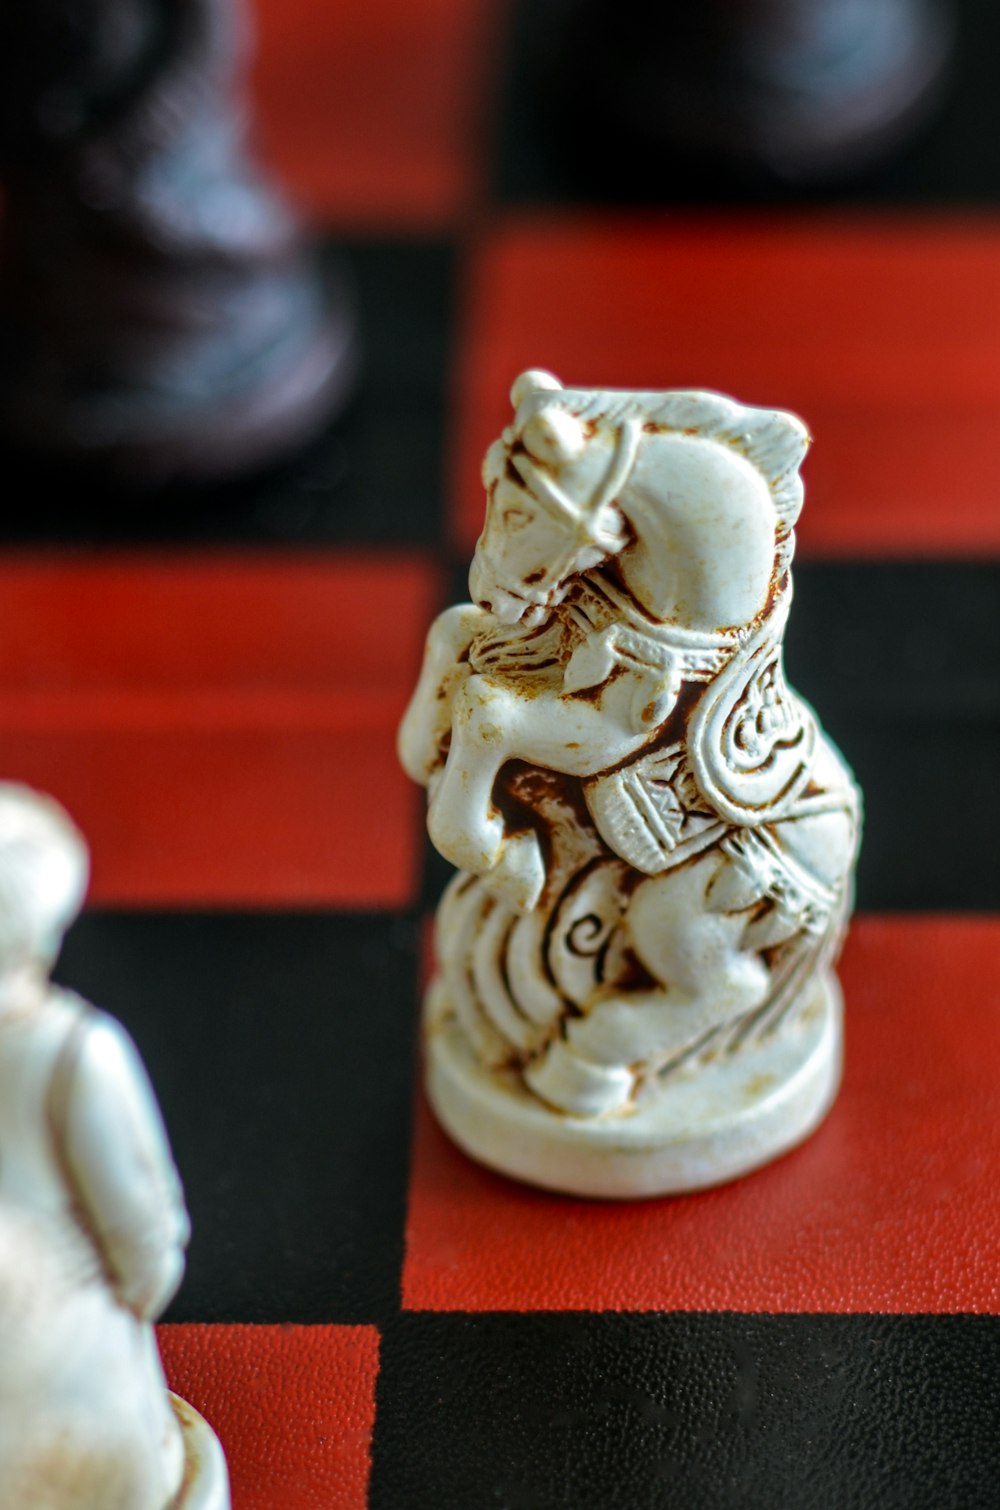 a close up of a chess board with figurines on it